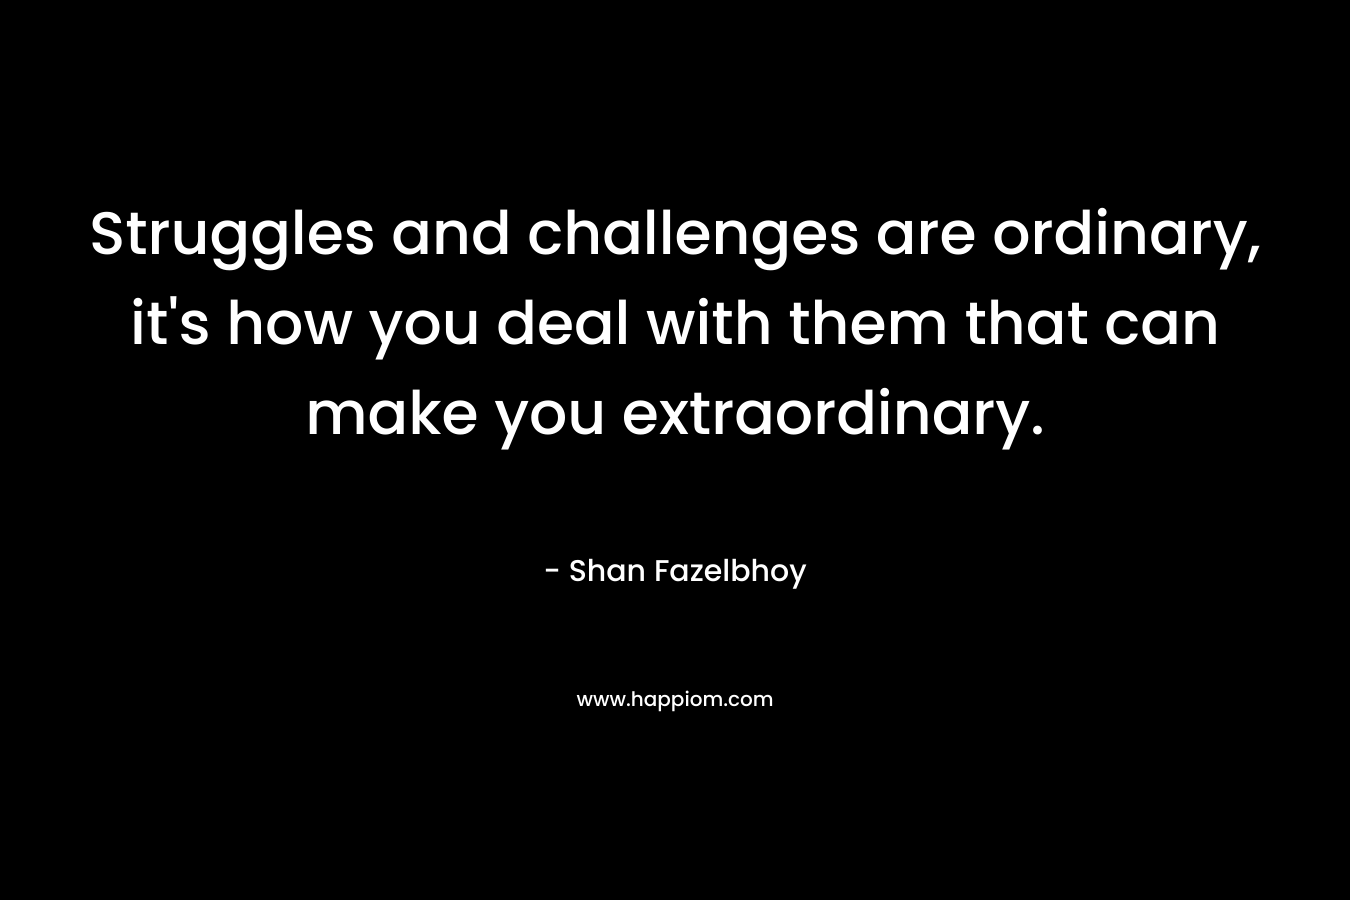 Struggles and challenges are ordinary, it’s how you deal with them that can make you extraordinary. – Shan Fazelbhoy